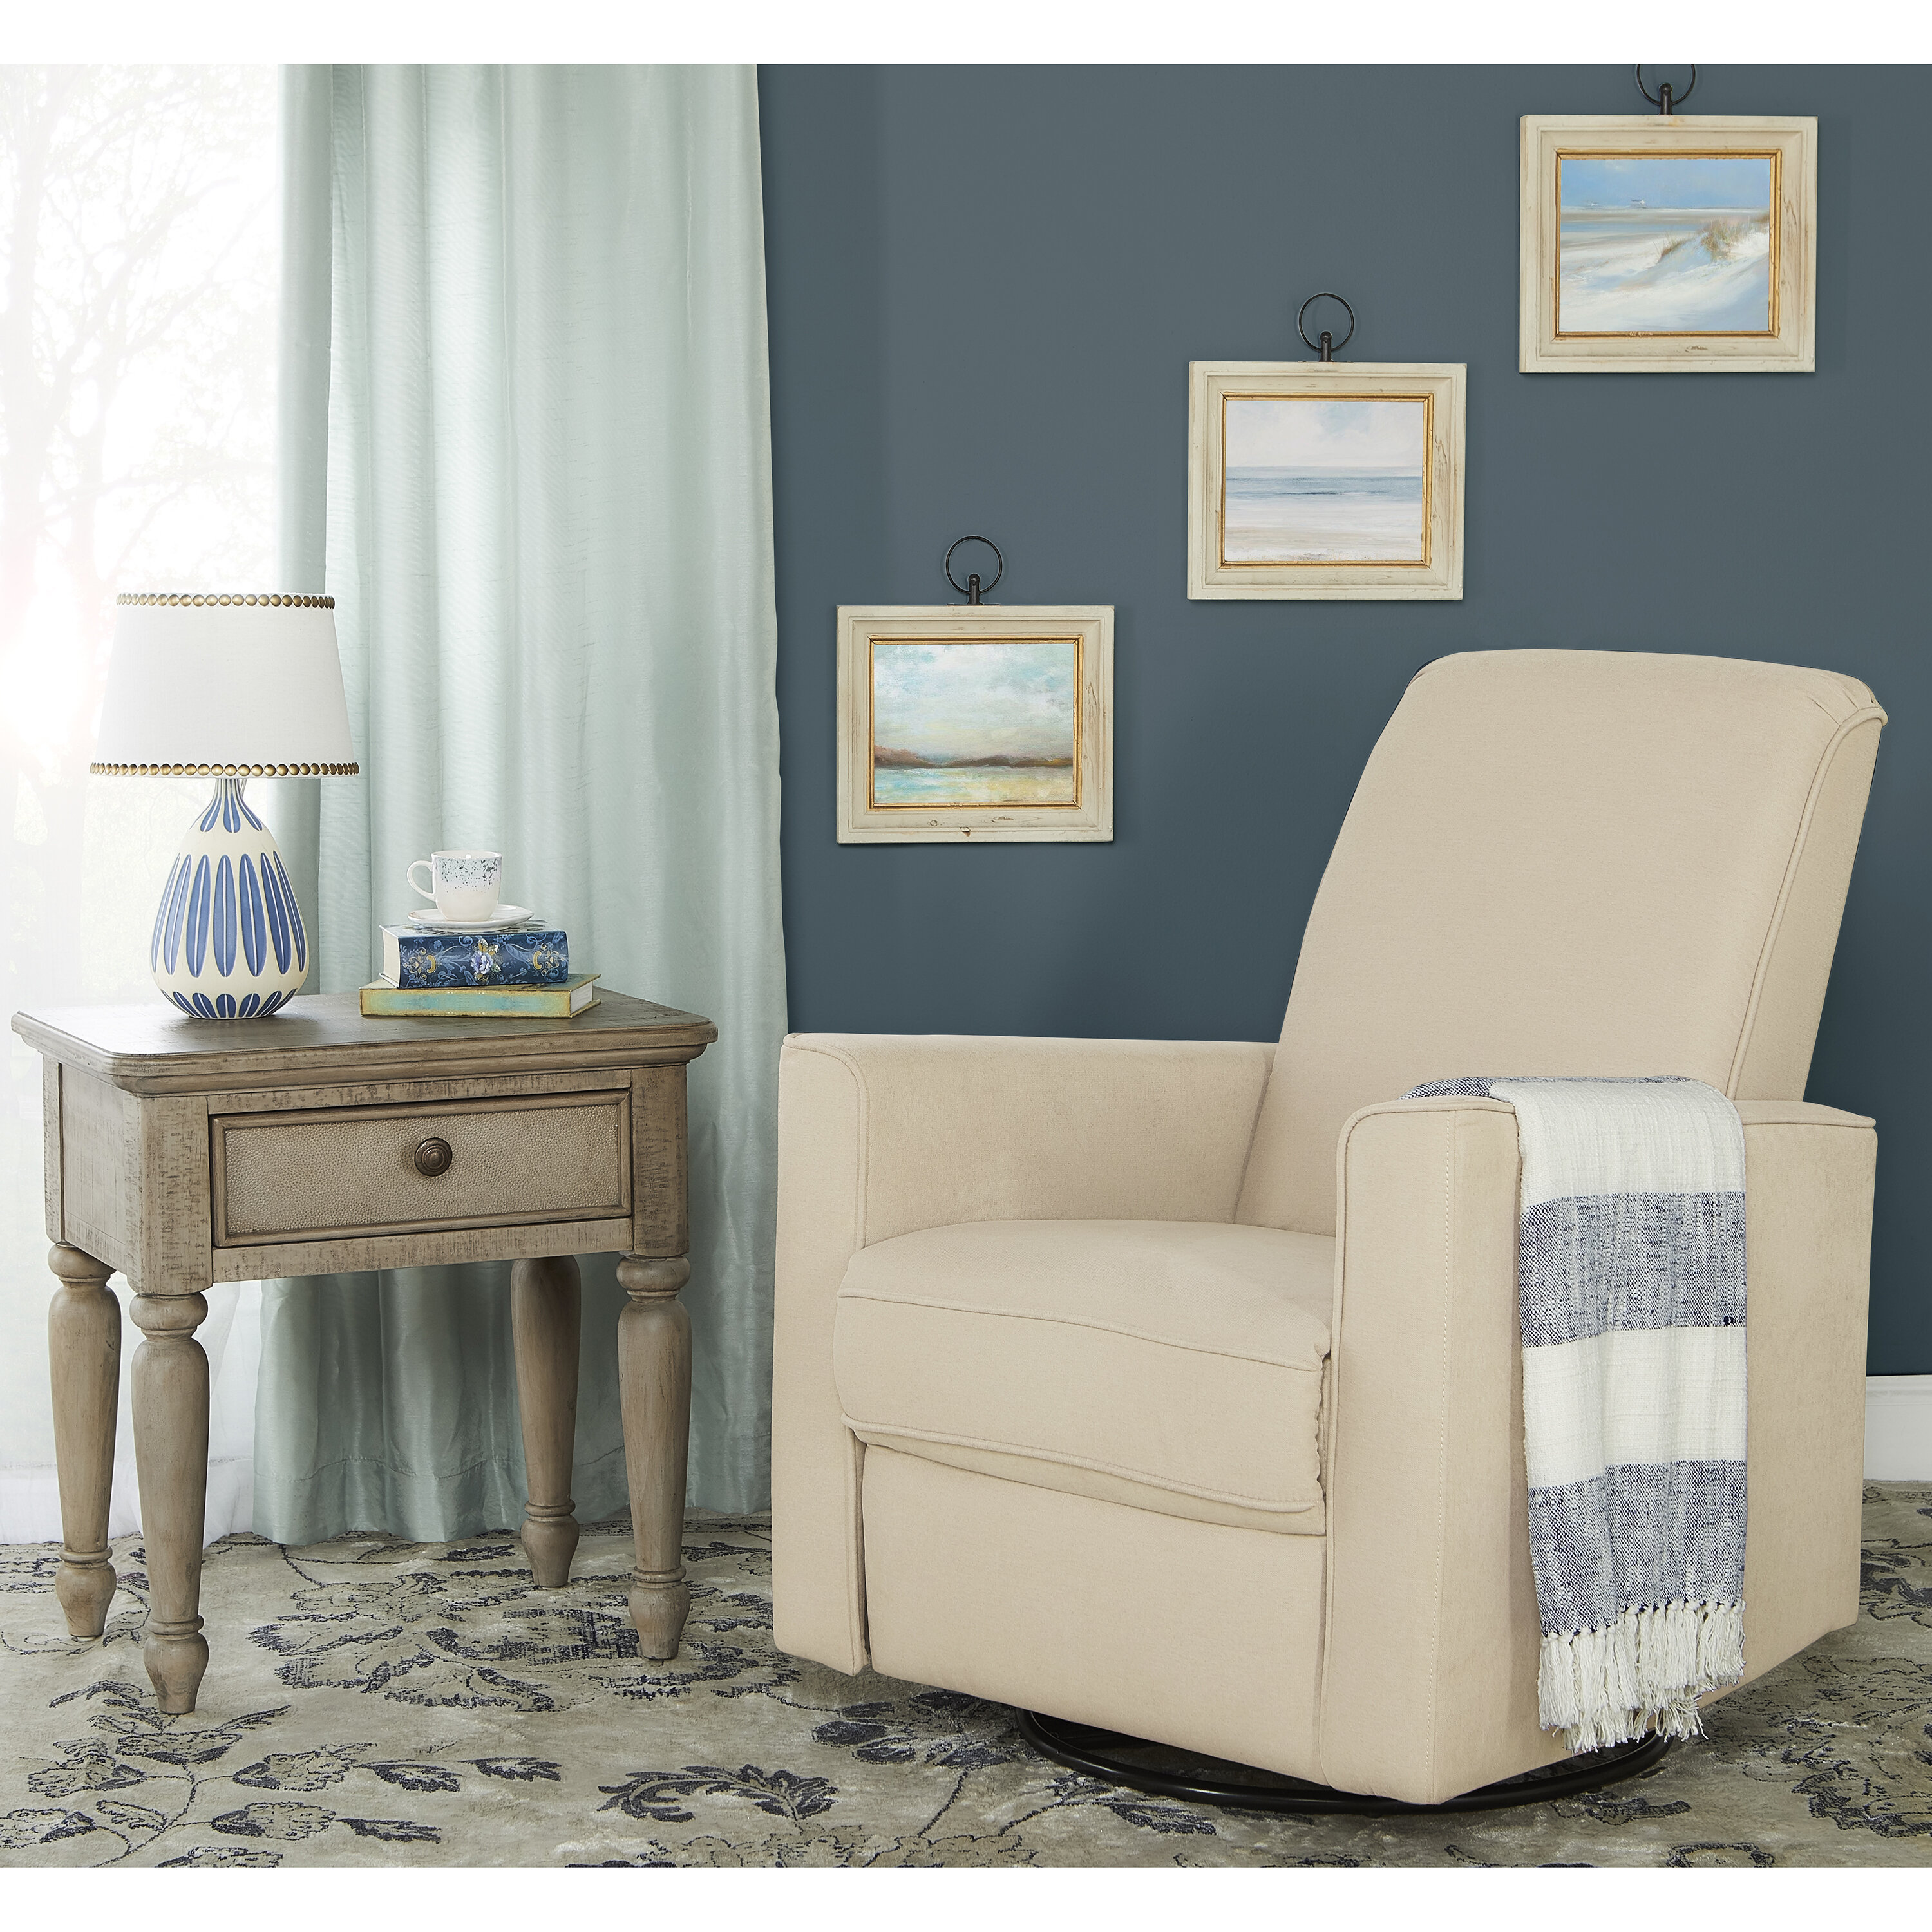 baby relax raleigh gliding recliner